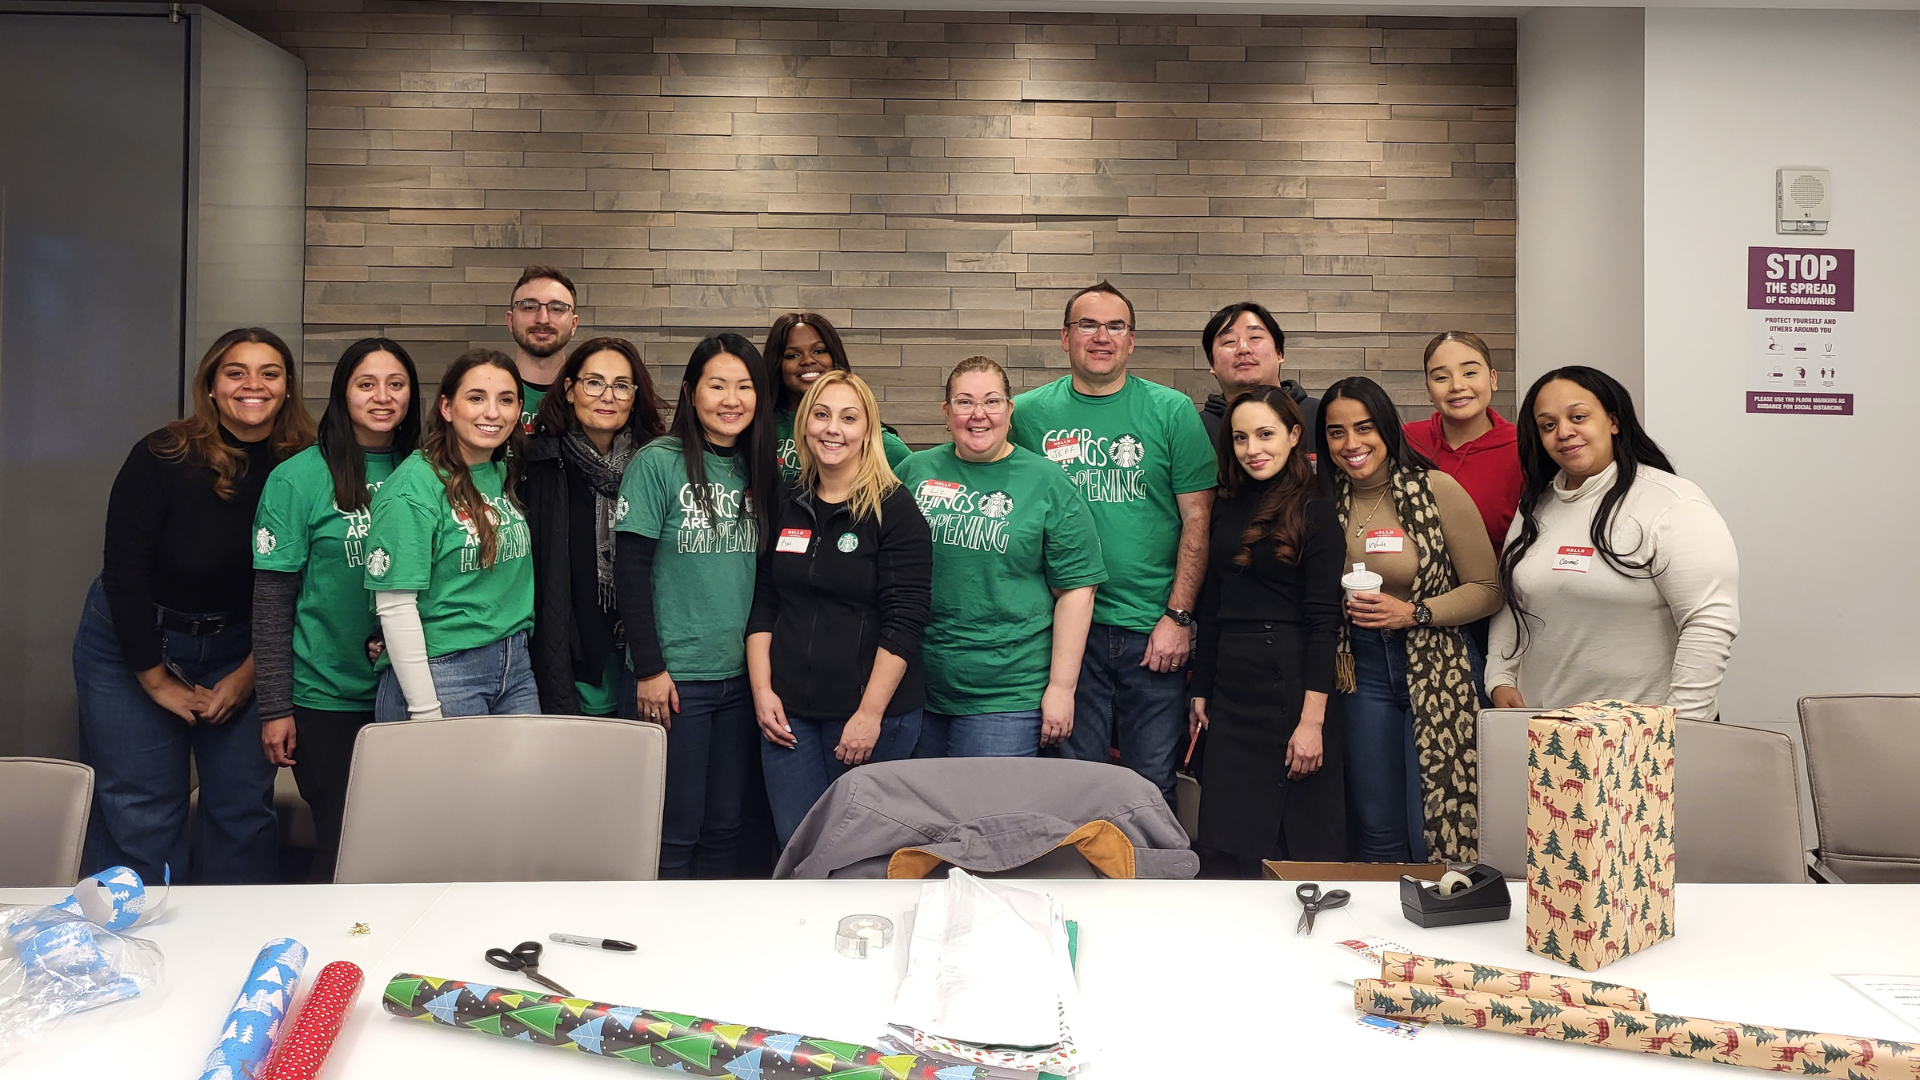 Starbucks Supports Communities by Volunteering with S:US